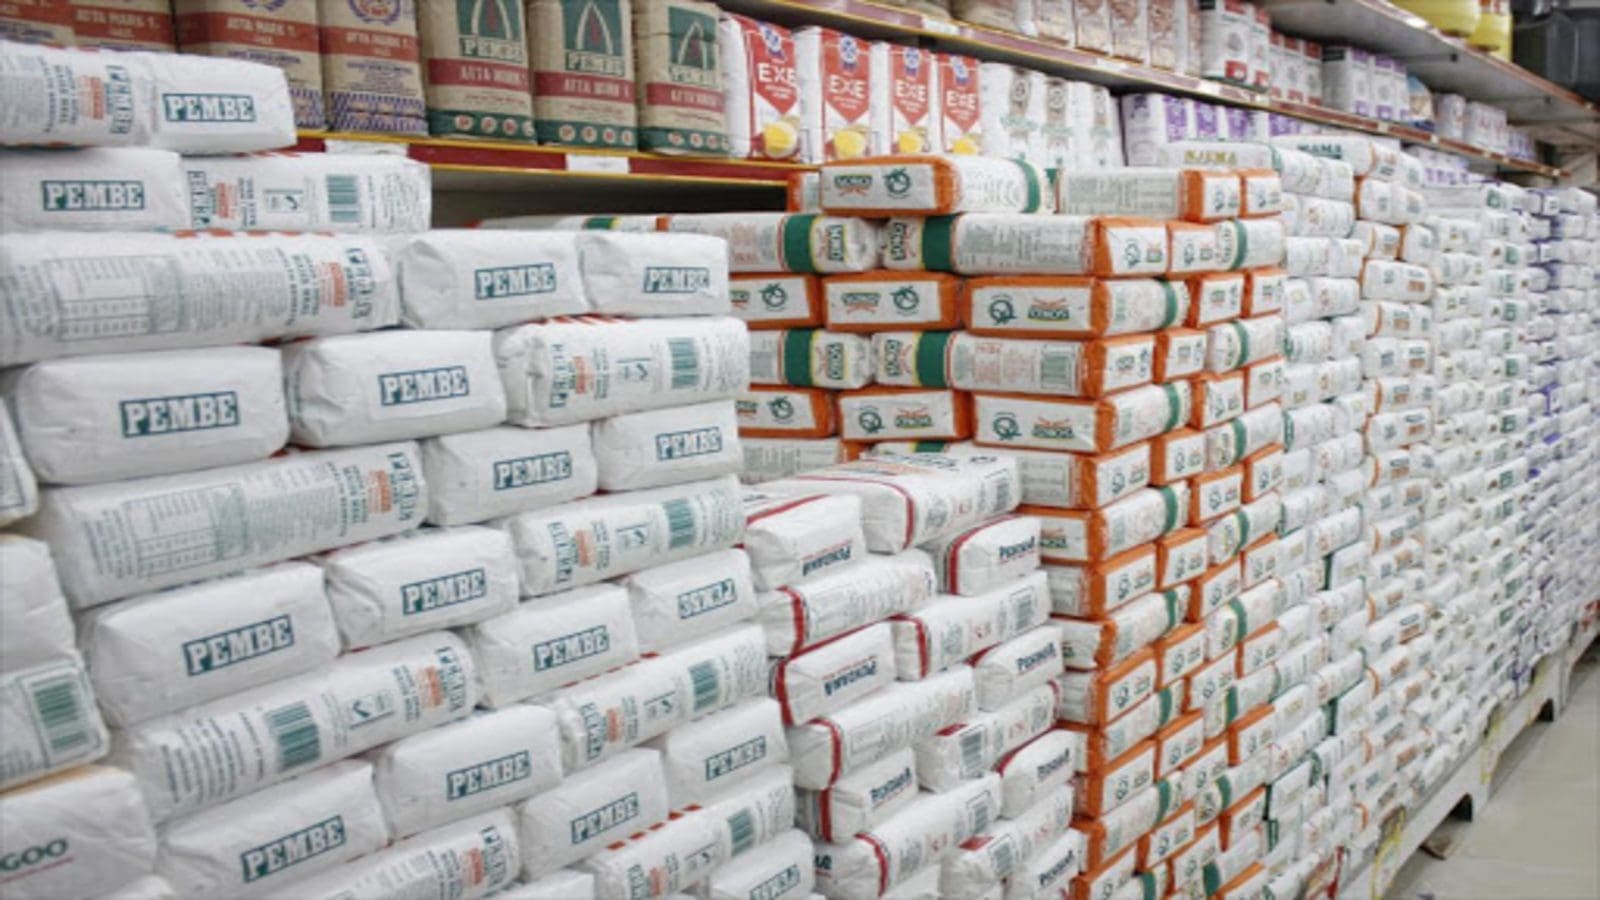 Maize meal prices set to hike as millers face cash flow constraints on the back of pending subsidy dues